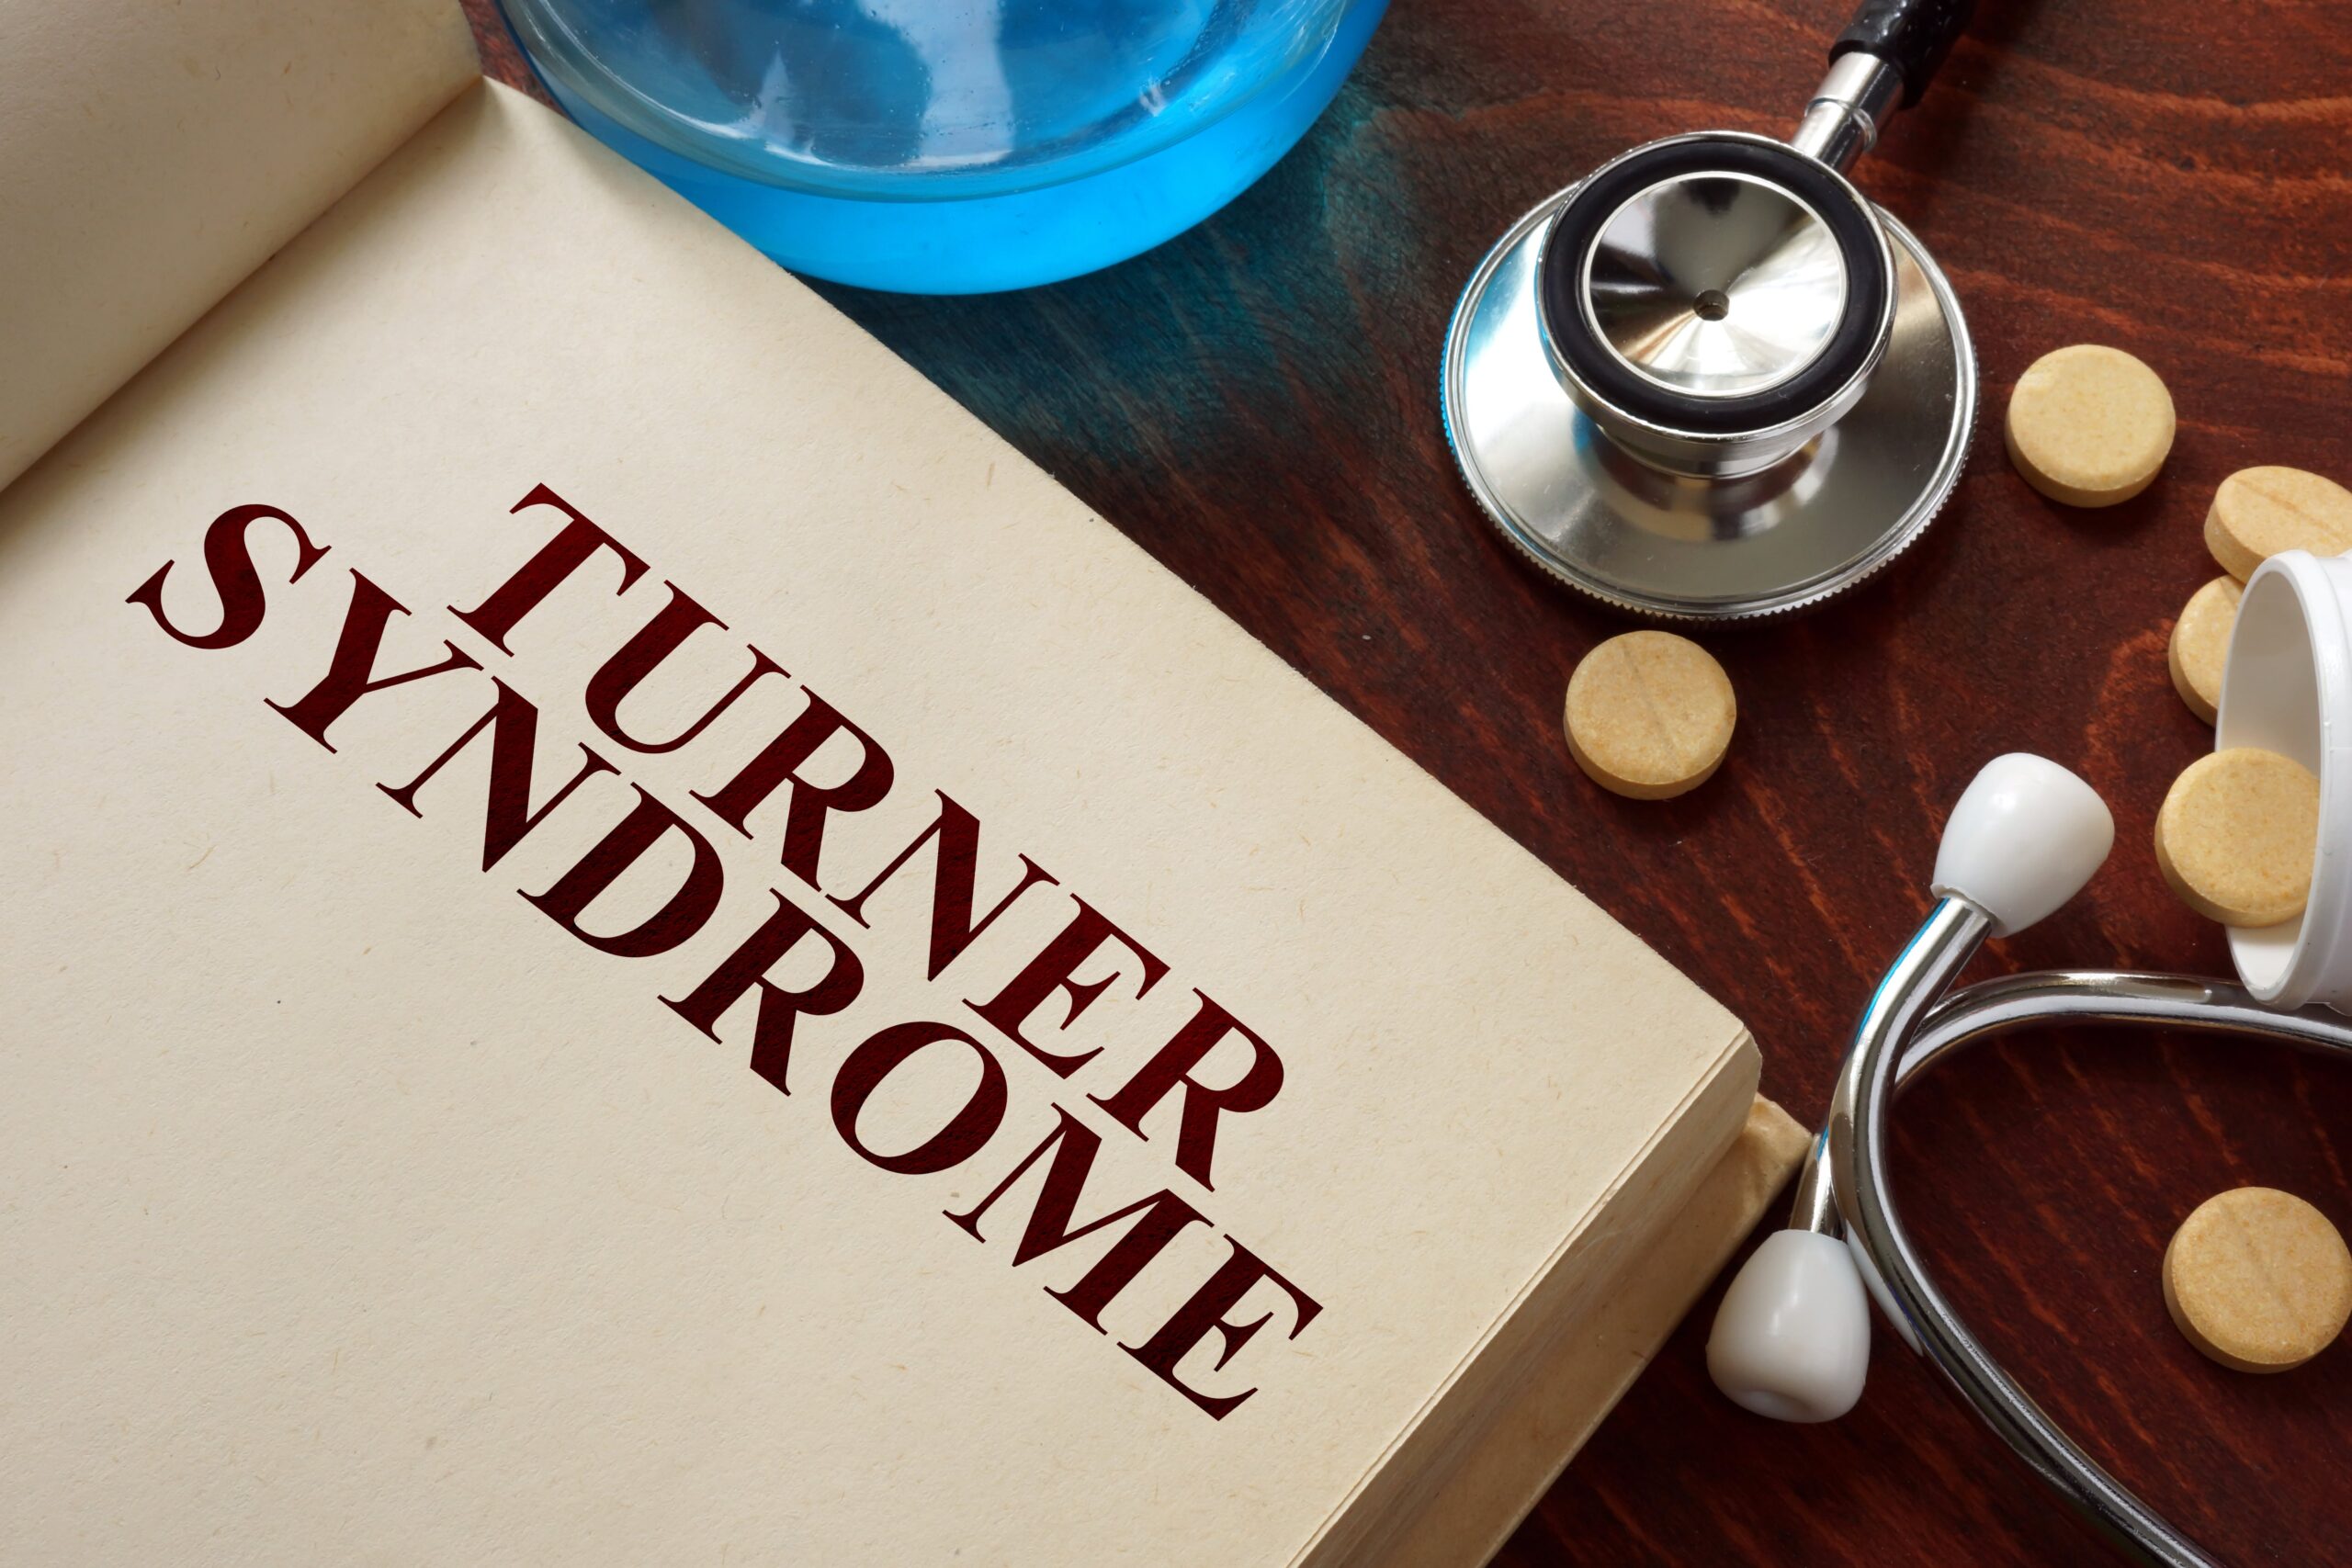 turner syndrome written on book next to treatment options